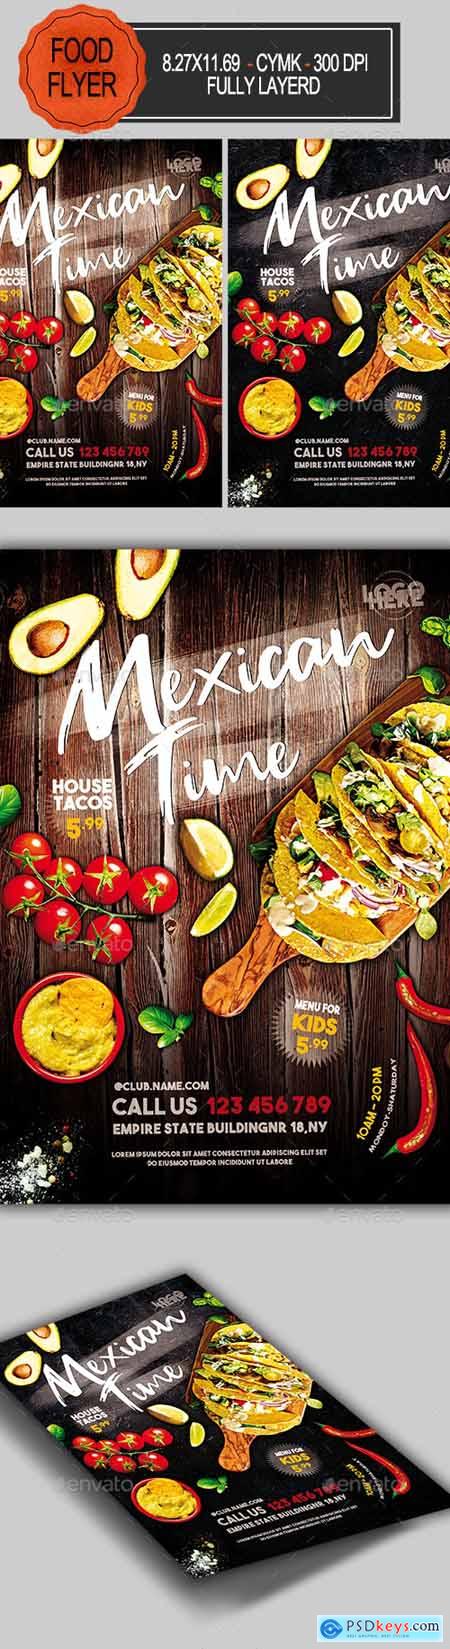 Mexican Food Flyer 24044077